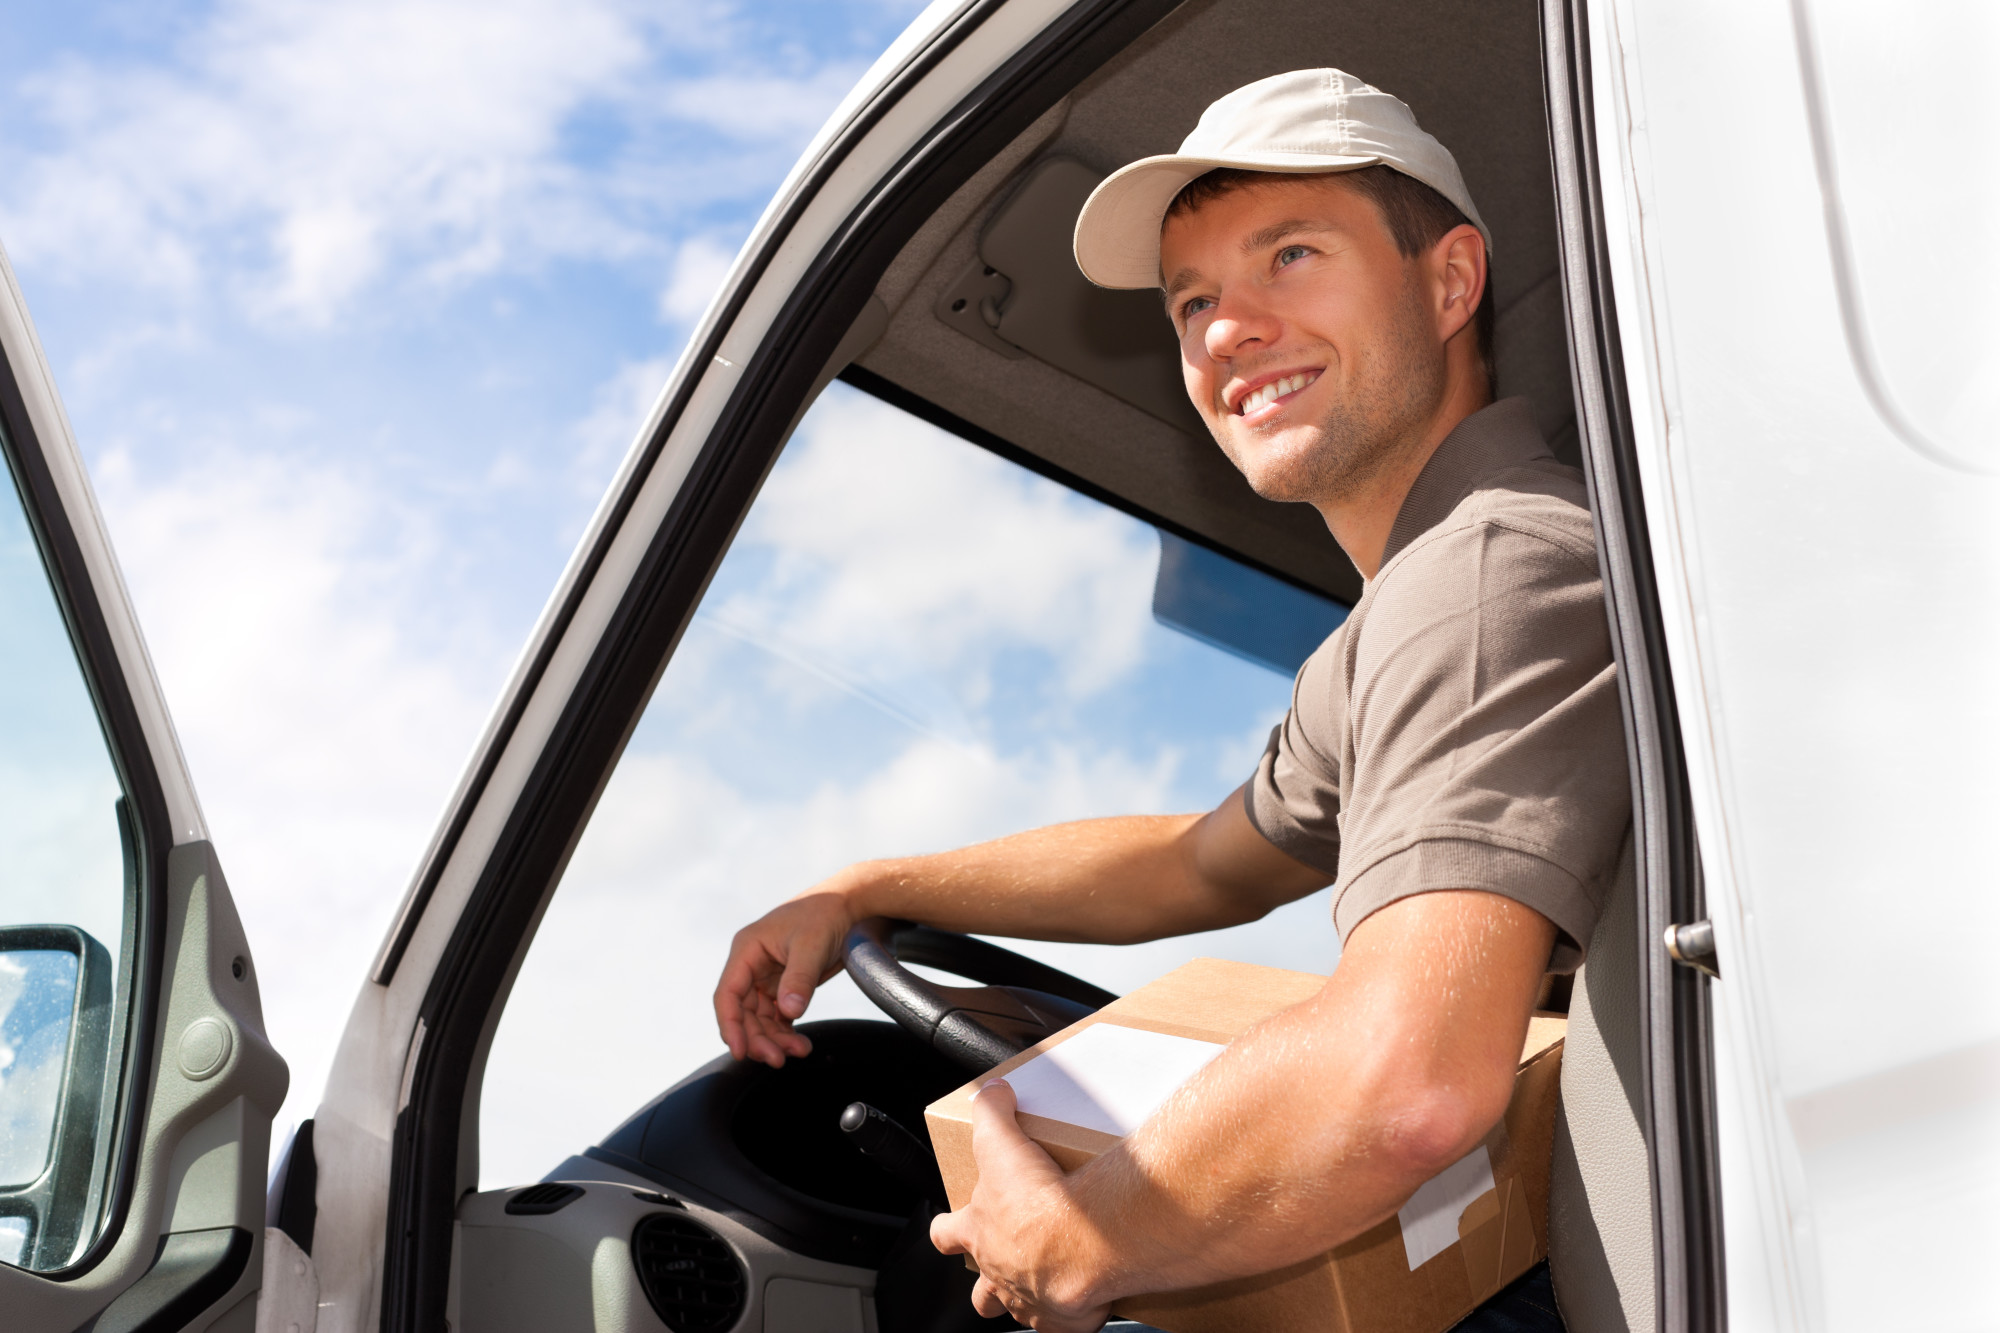 What Can Be Delivered with a Same-Day Delivery Courier